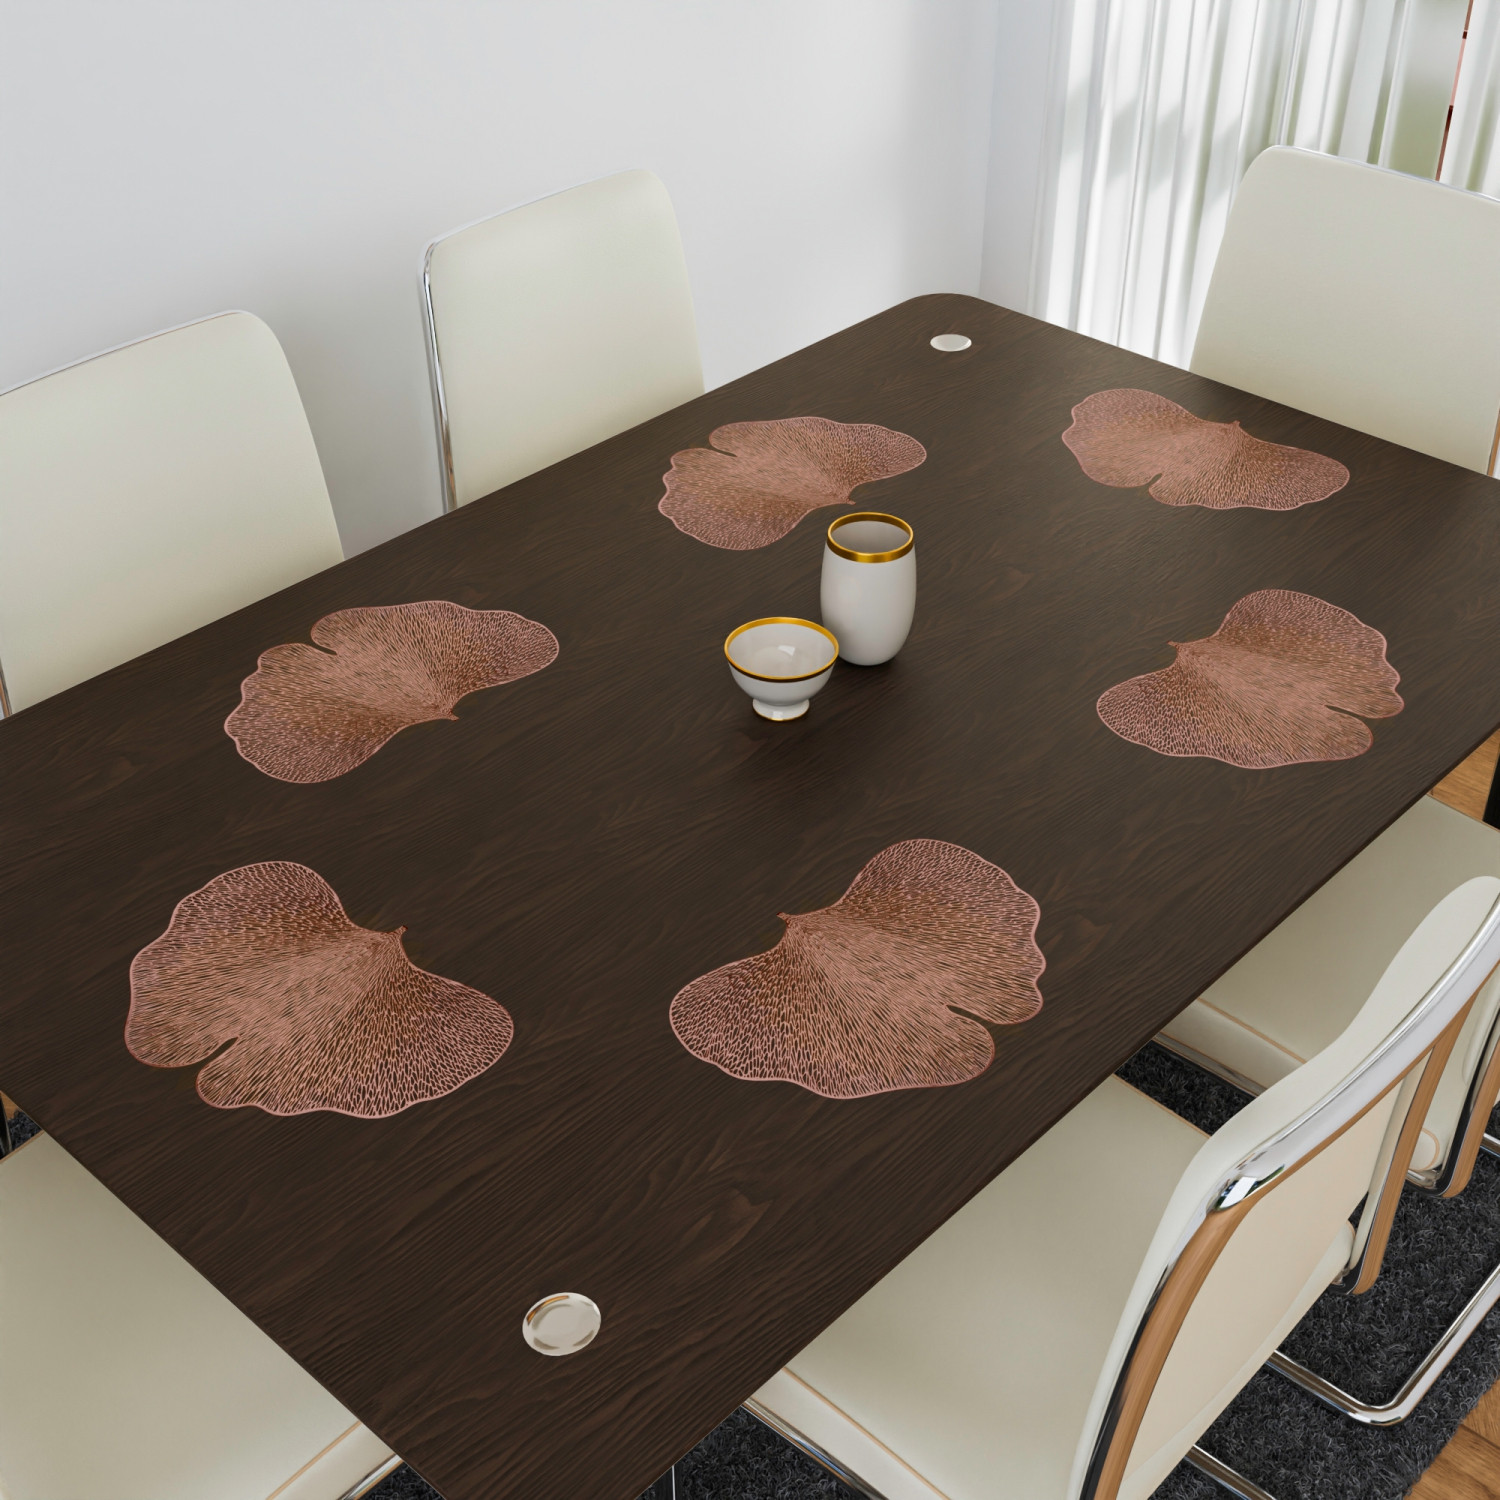 Kuber Industries Placemat | Placemats for Dining Room | Designer Table Mat Set | Placemats for Kitchen Table | Side Table Placemats | Butterfly Placemat Set |Copper